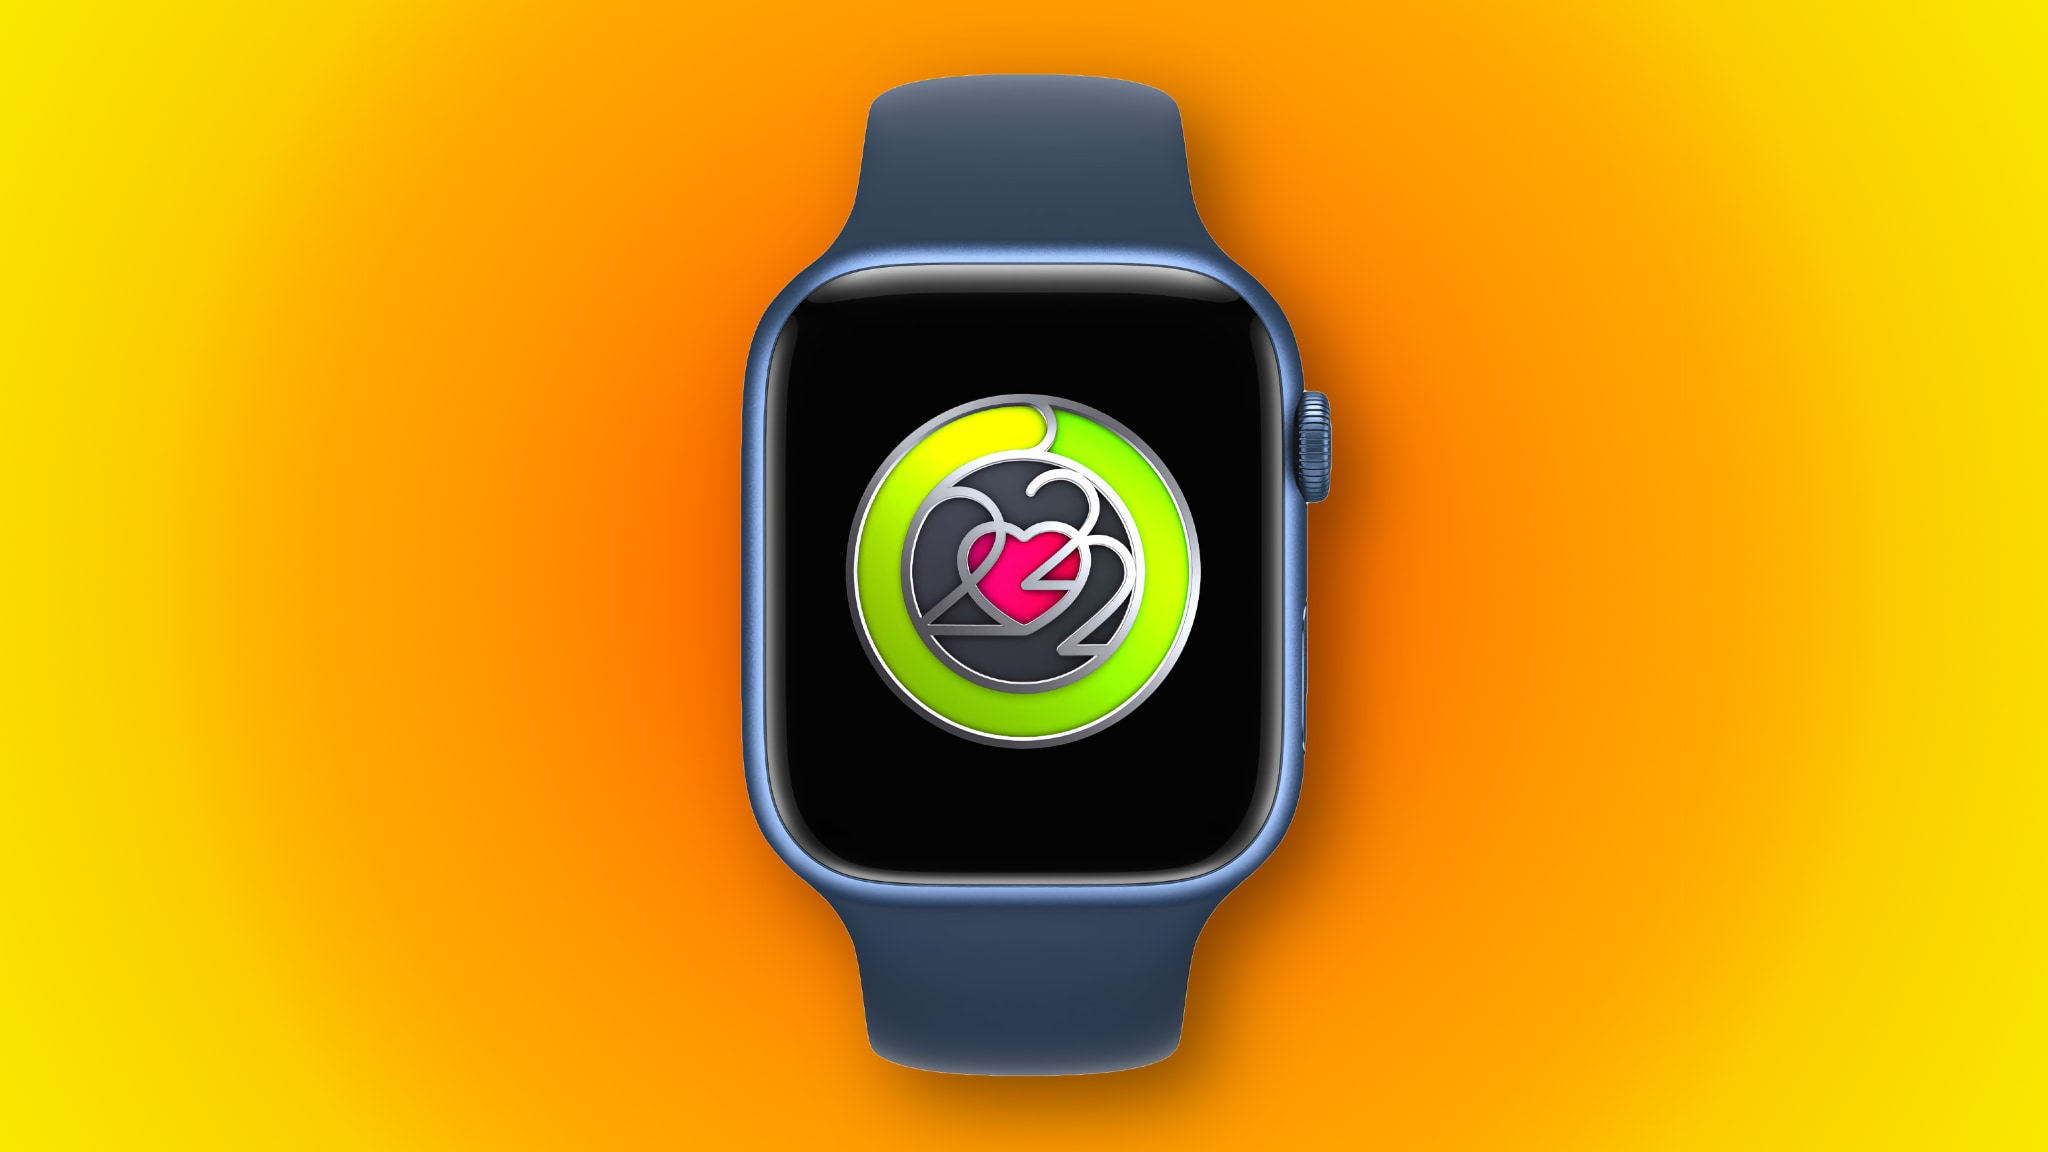 Apple's marketing image showing a medal for the successful completion of the Apple Watch Activity challenge for Heart Month in February